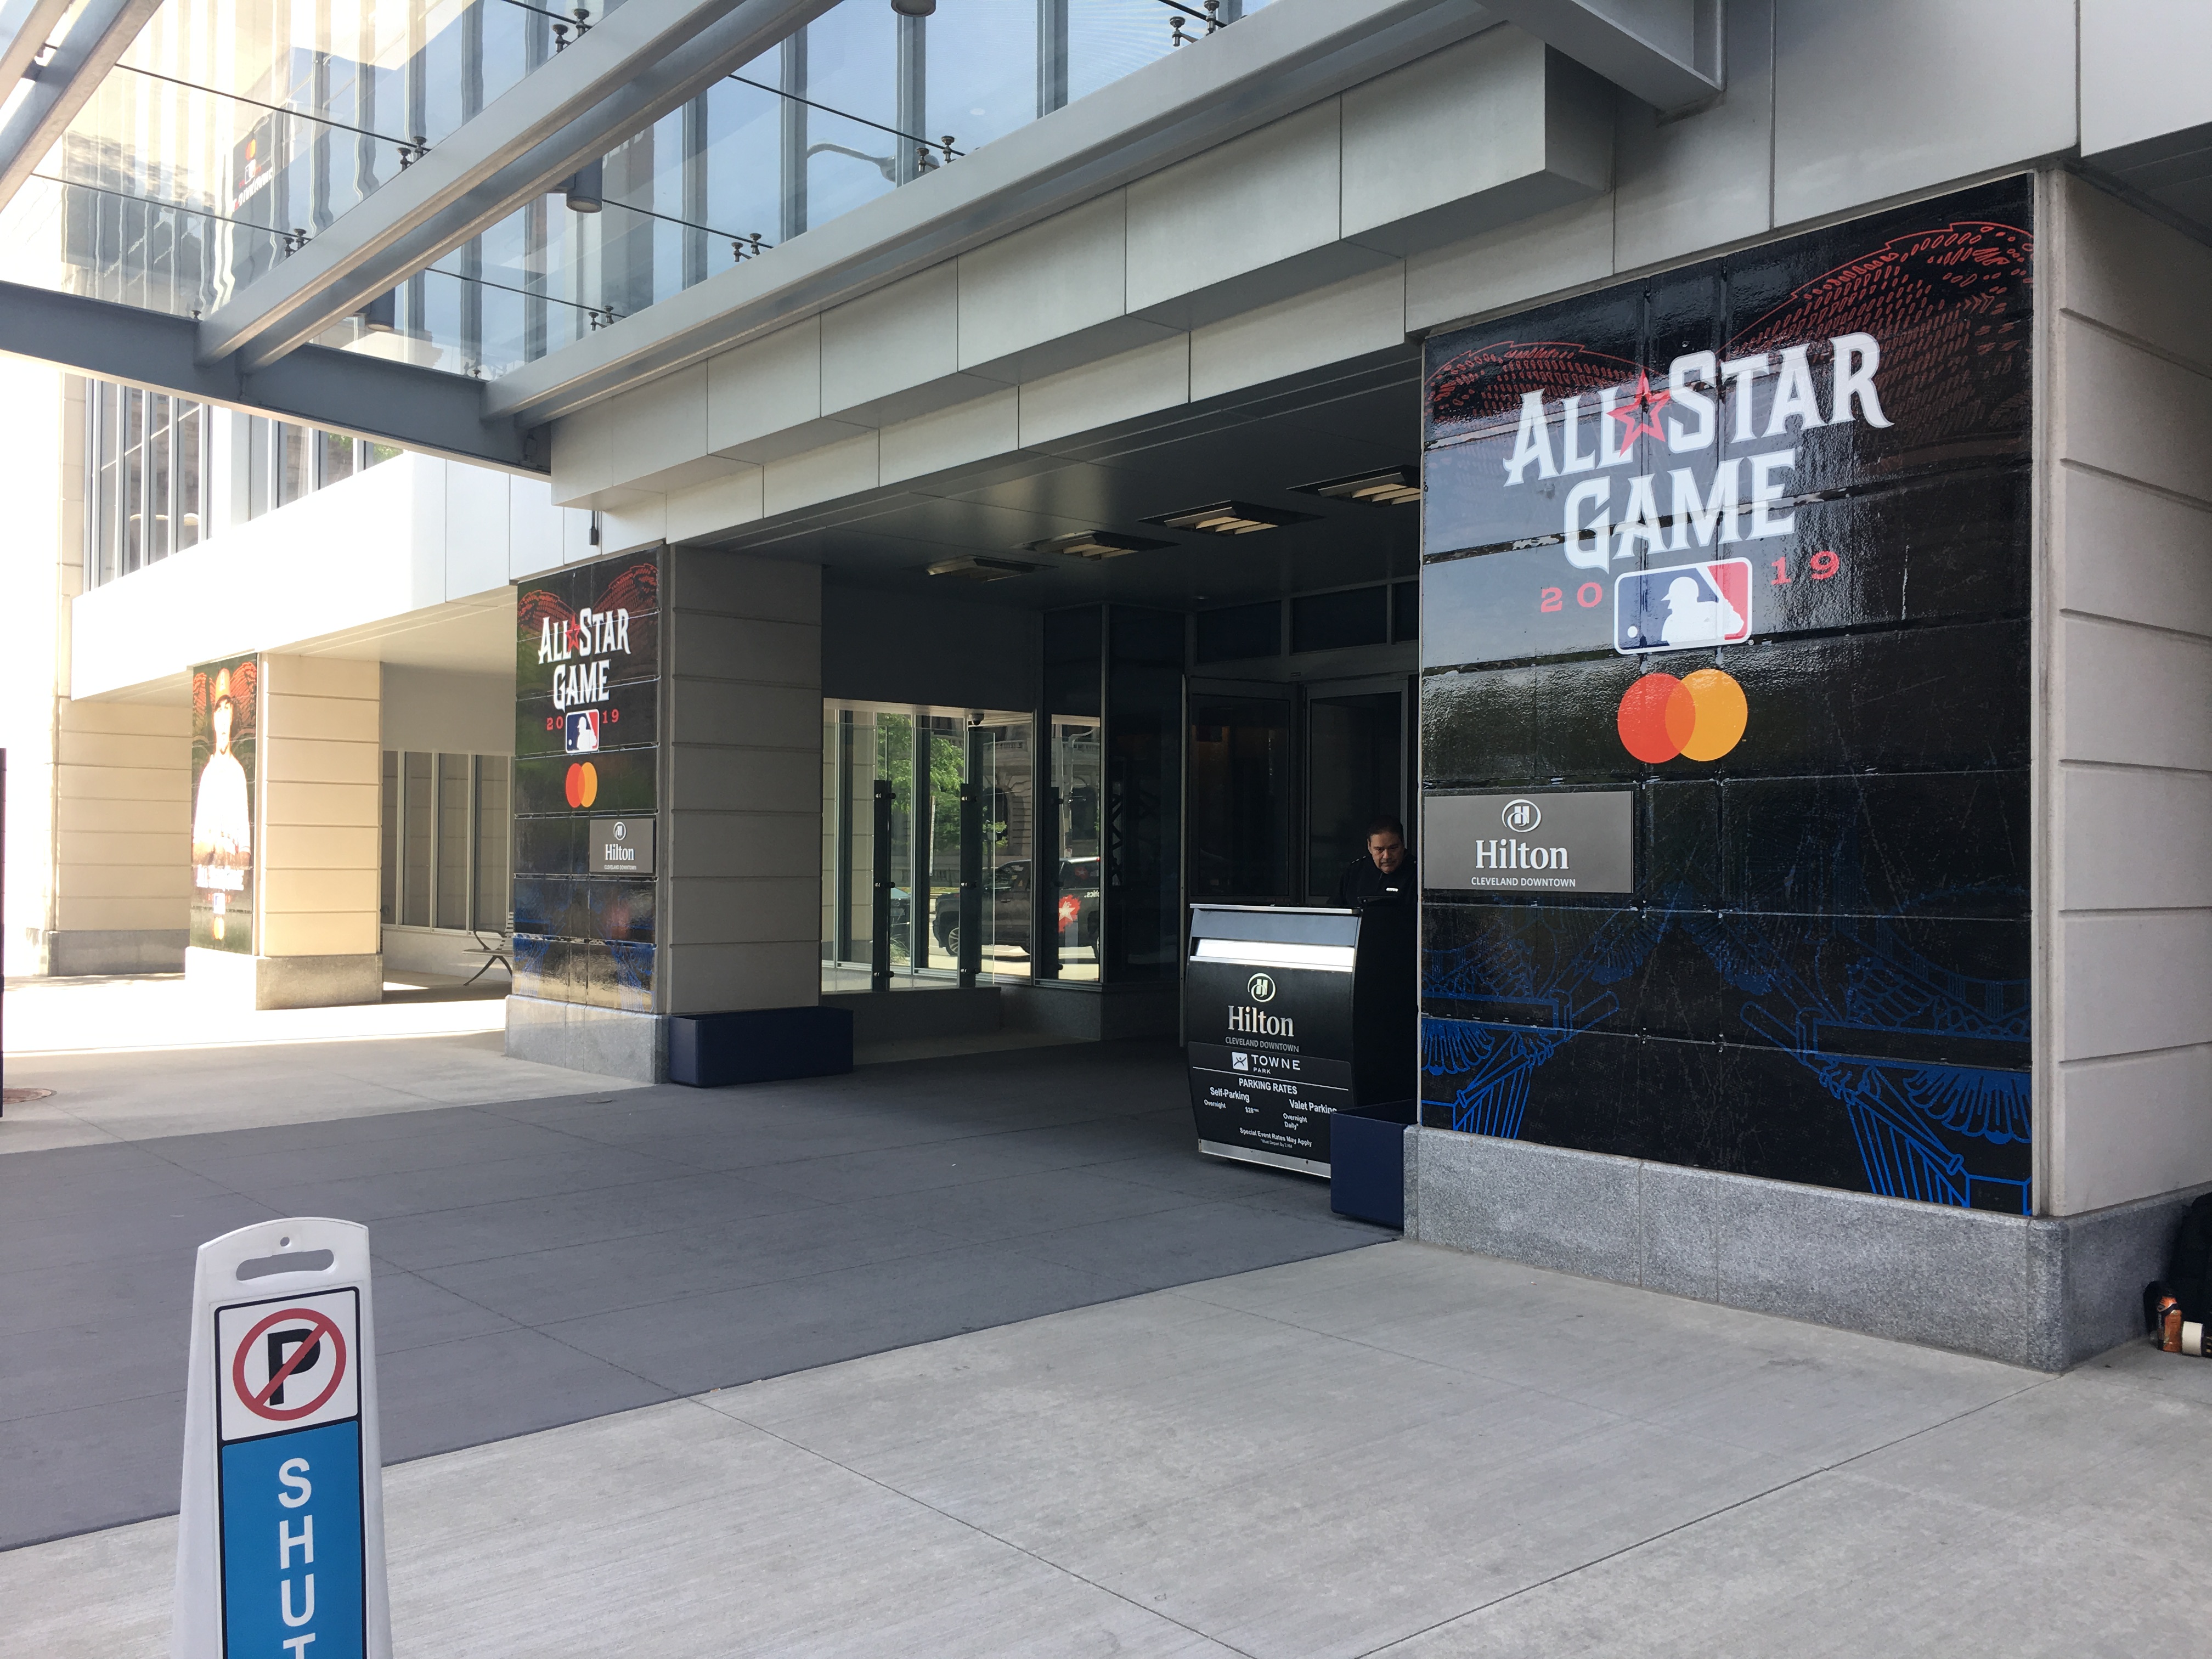 MLB All-Star game exterior wall covering